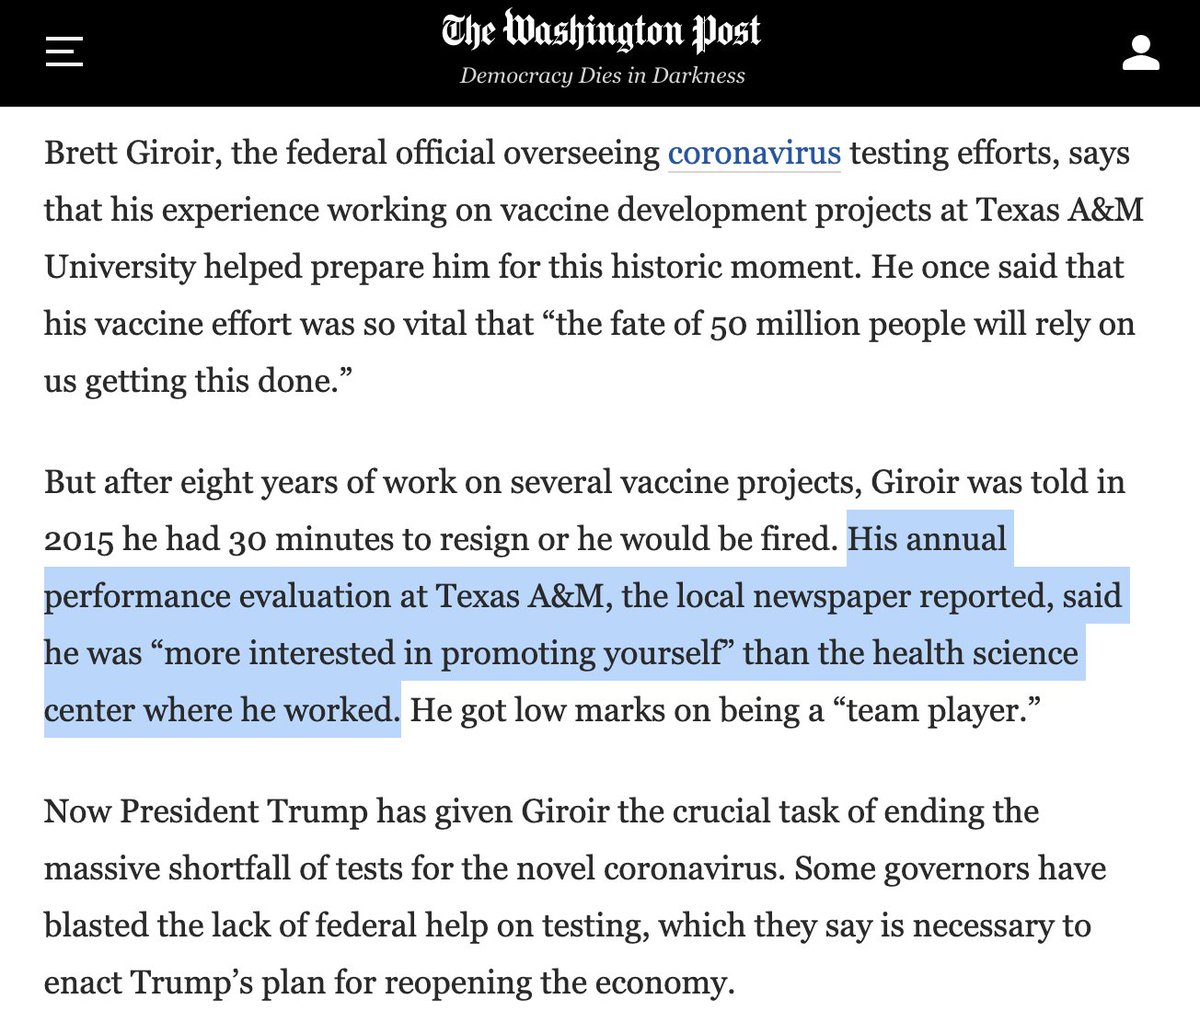 3) Trump's "testing czar" was pushed out of his last job because he focused more on self-promotion than getting the job done. https://www.washingtonpost.com/politics/brett-giroir-trumps-testing-czar-was-forced-out-of-a-job-developing-vaccine-projects-now-hes-on-the-hot-seat/2020/04/19/b061b968-7e89-11ea-8de7-9fdff6d5d83e_story.html